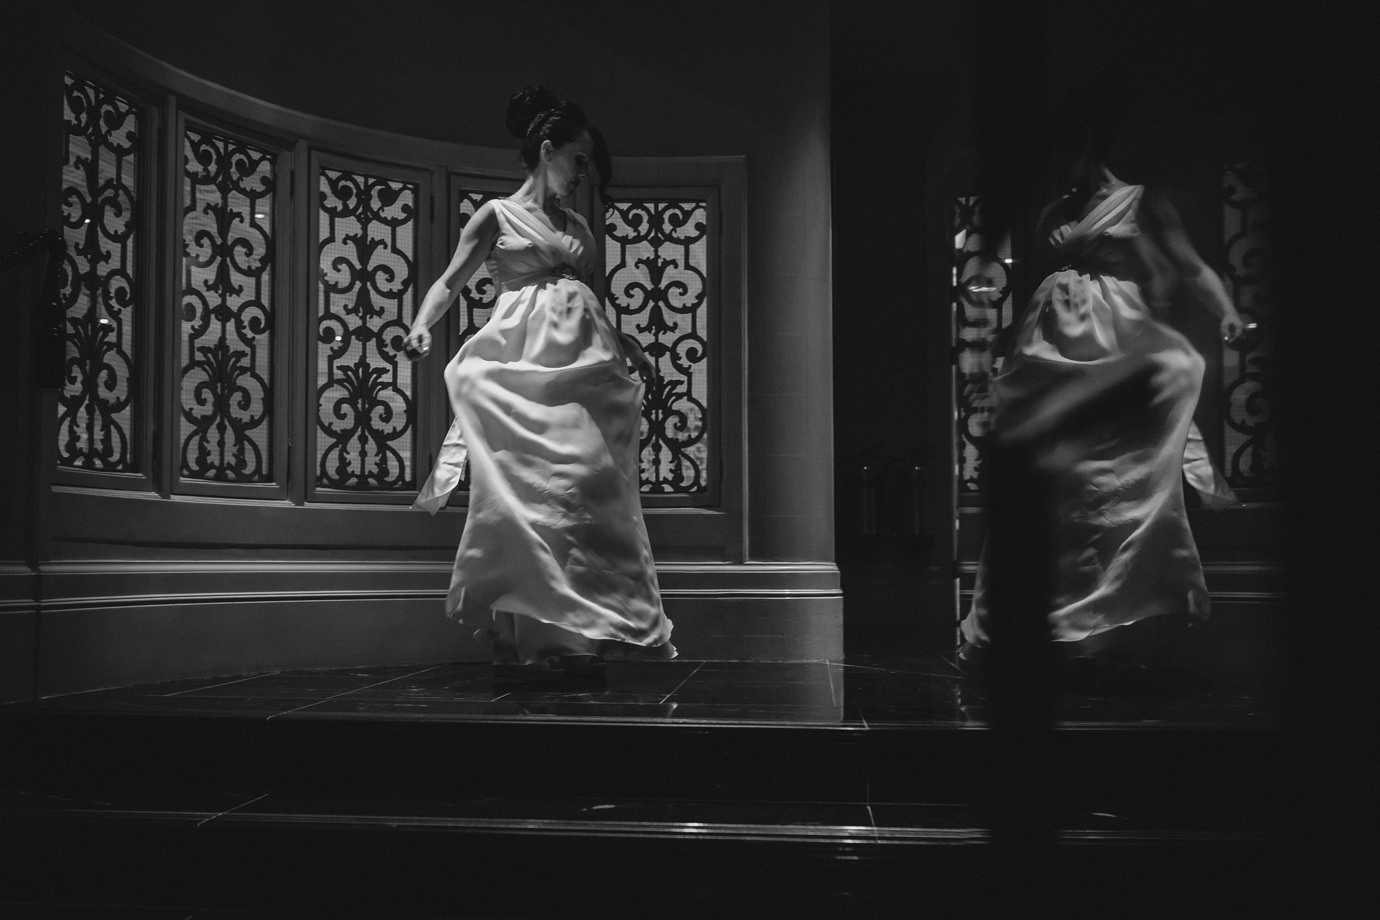 Swirling the dress - art-deco at the Savoy hotel, London wedding photography